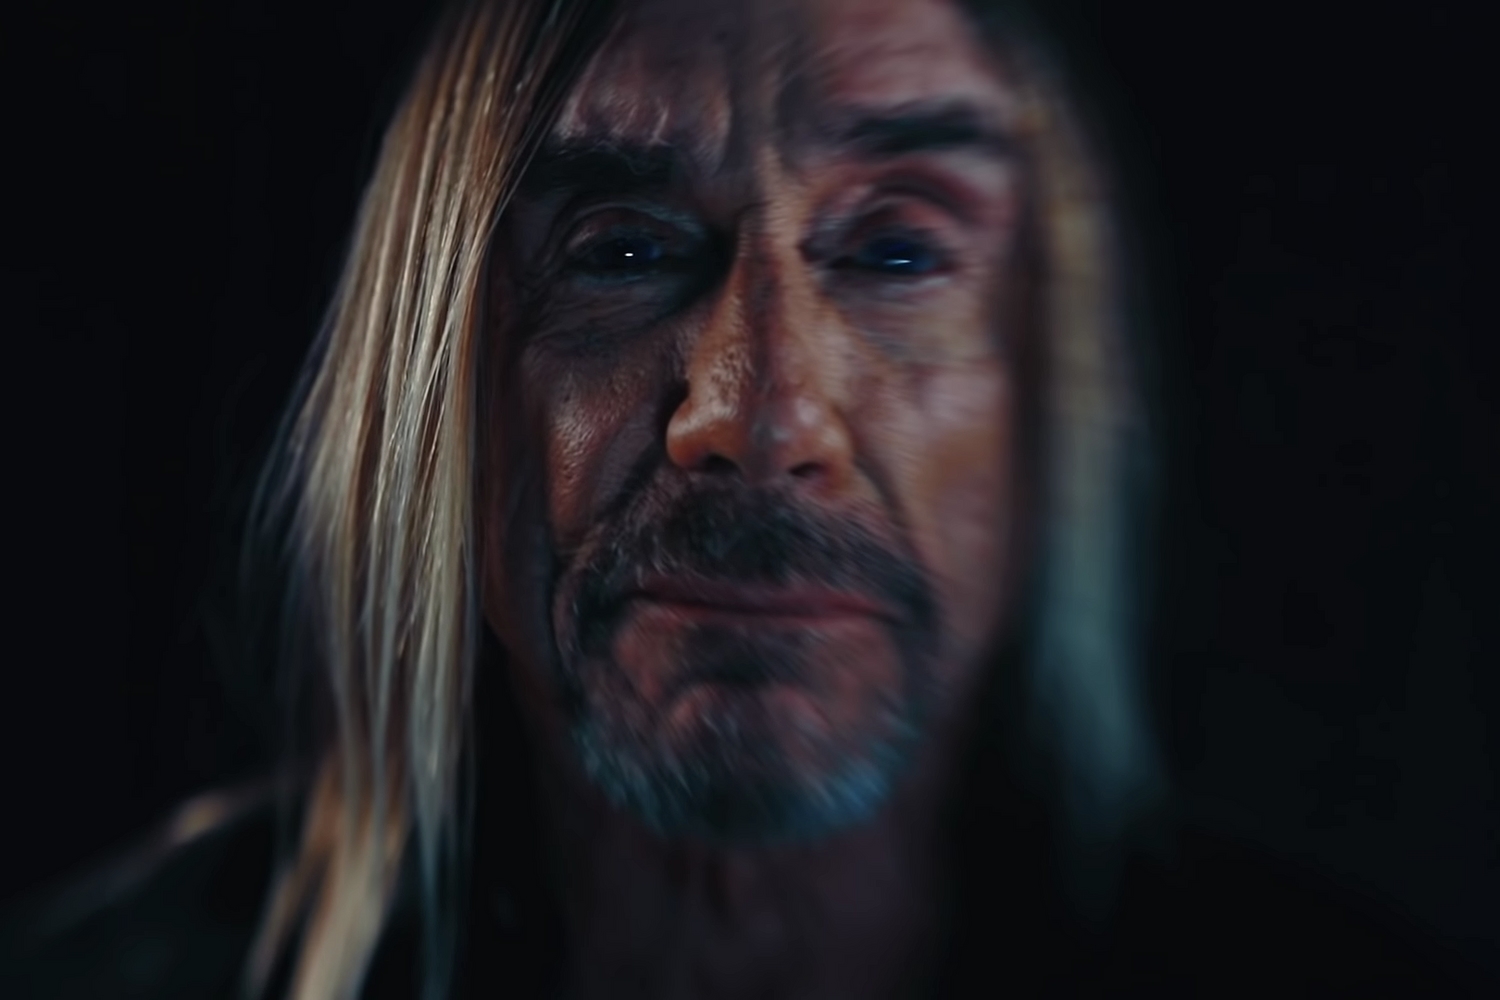 Iggy Pop shares poignant 'We Are The People' video